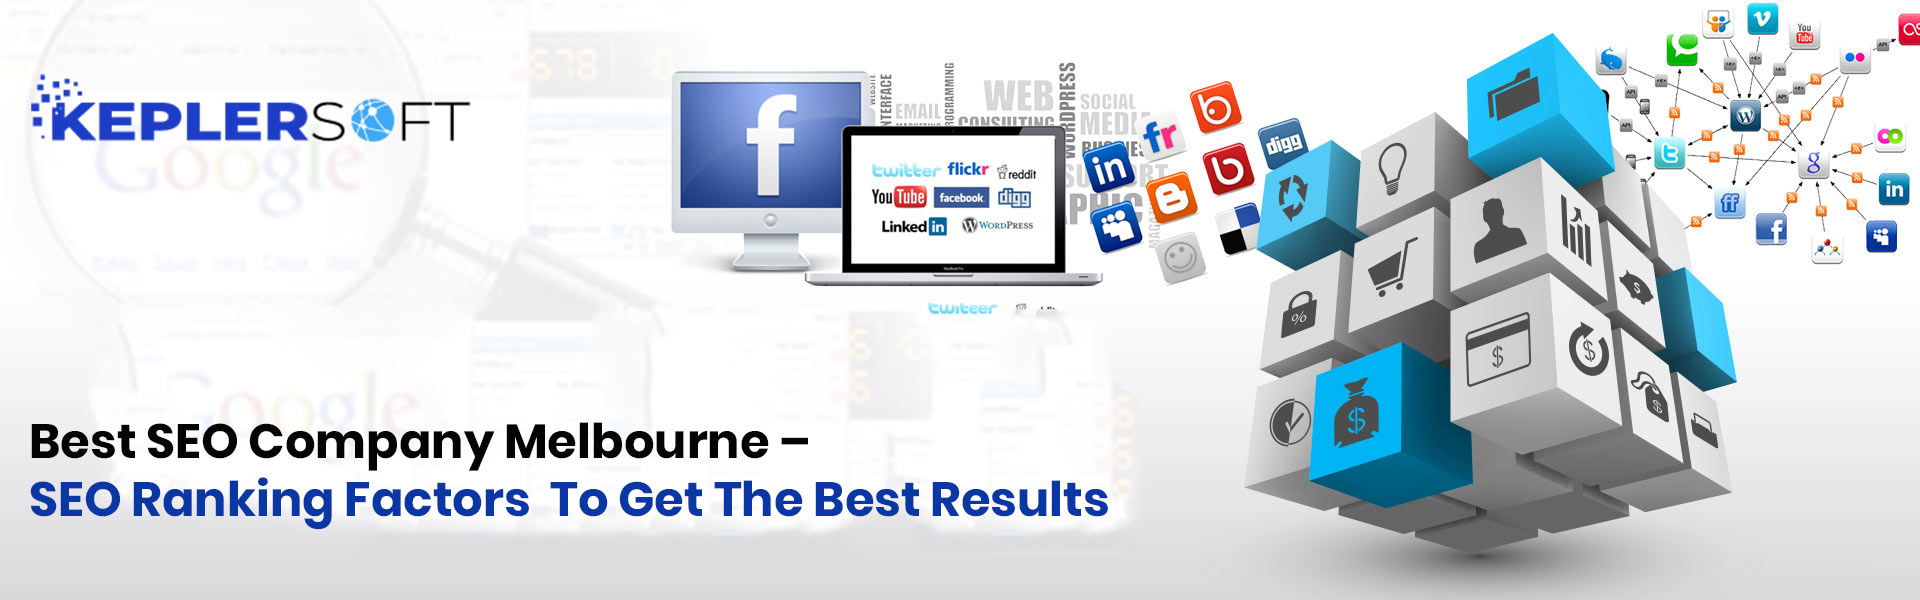 Best SEO Company Melbourne – SEO Ranking Factors To Get The Best Results